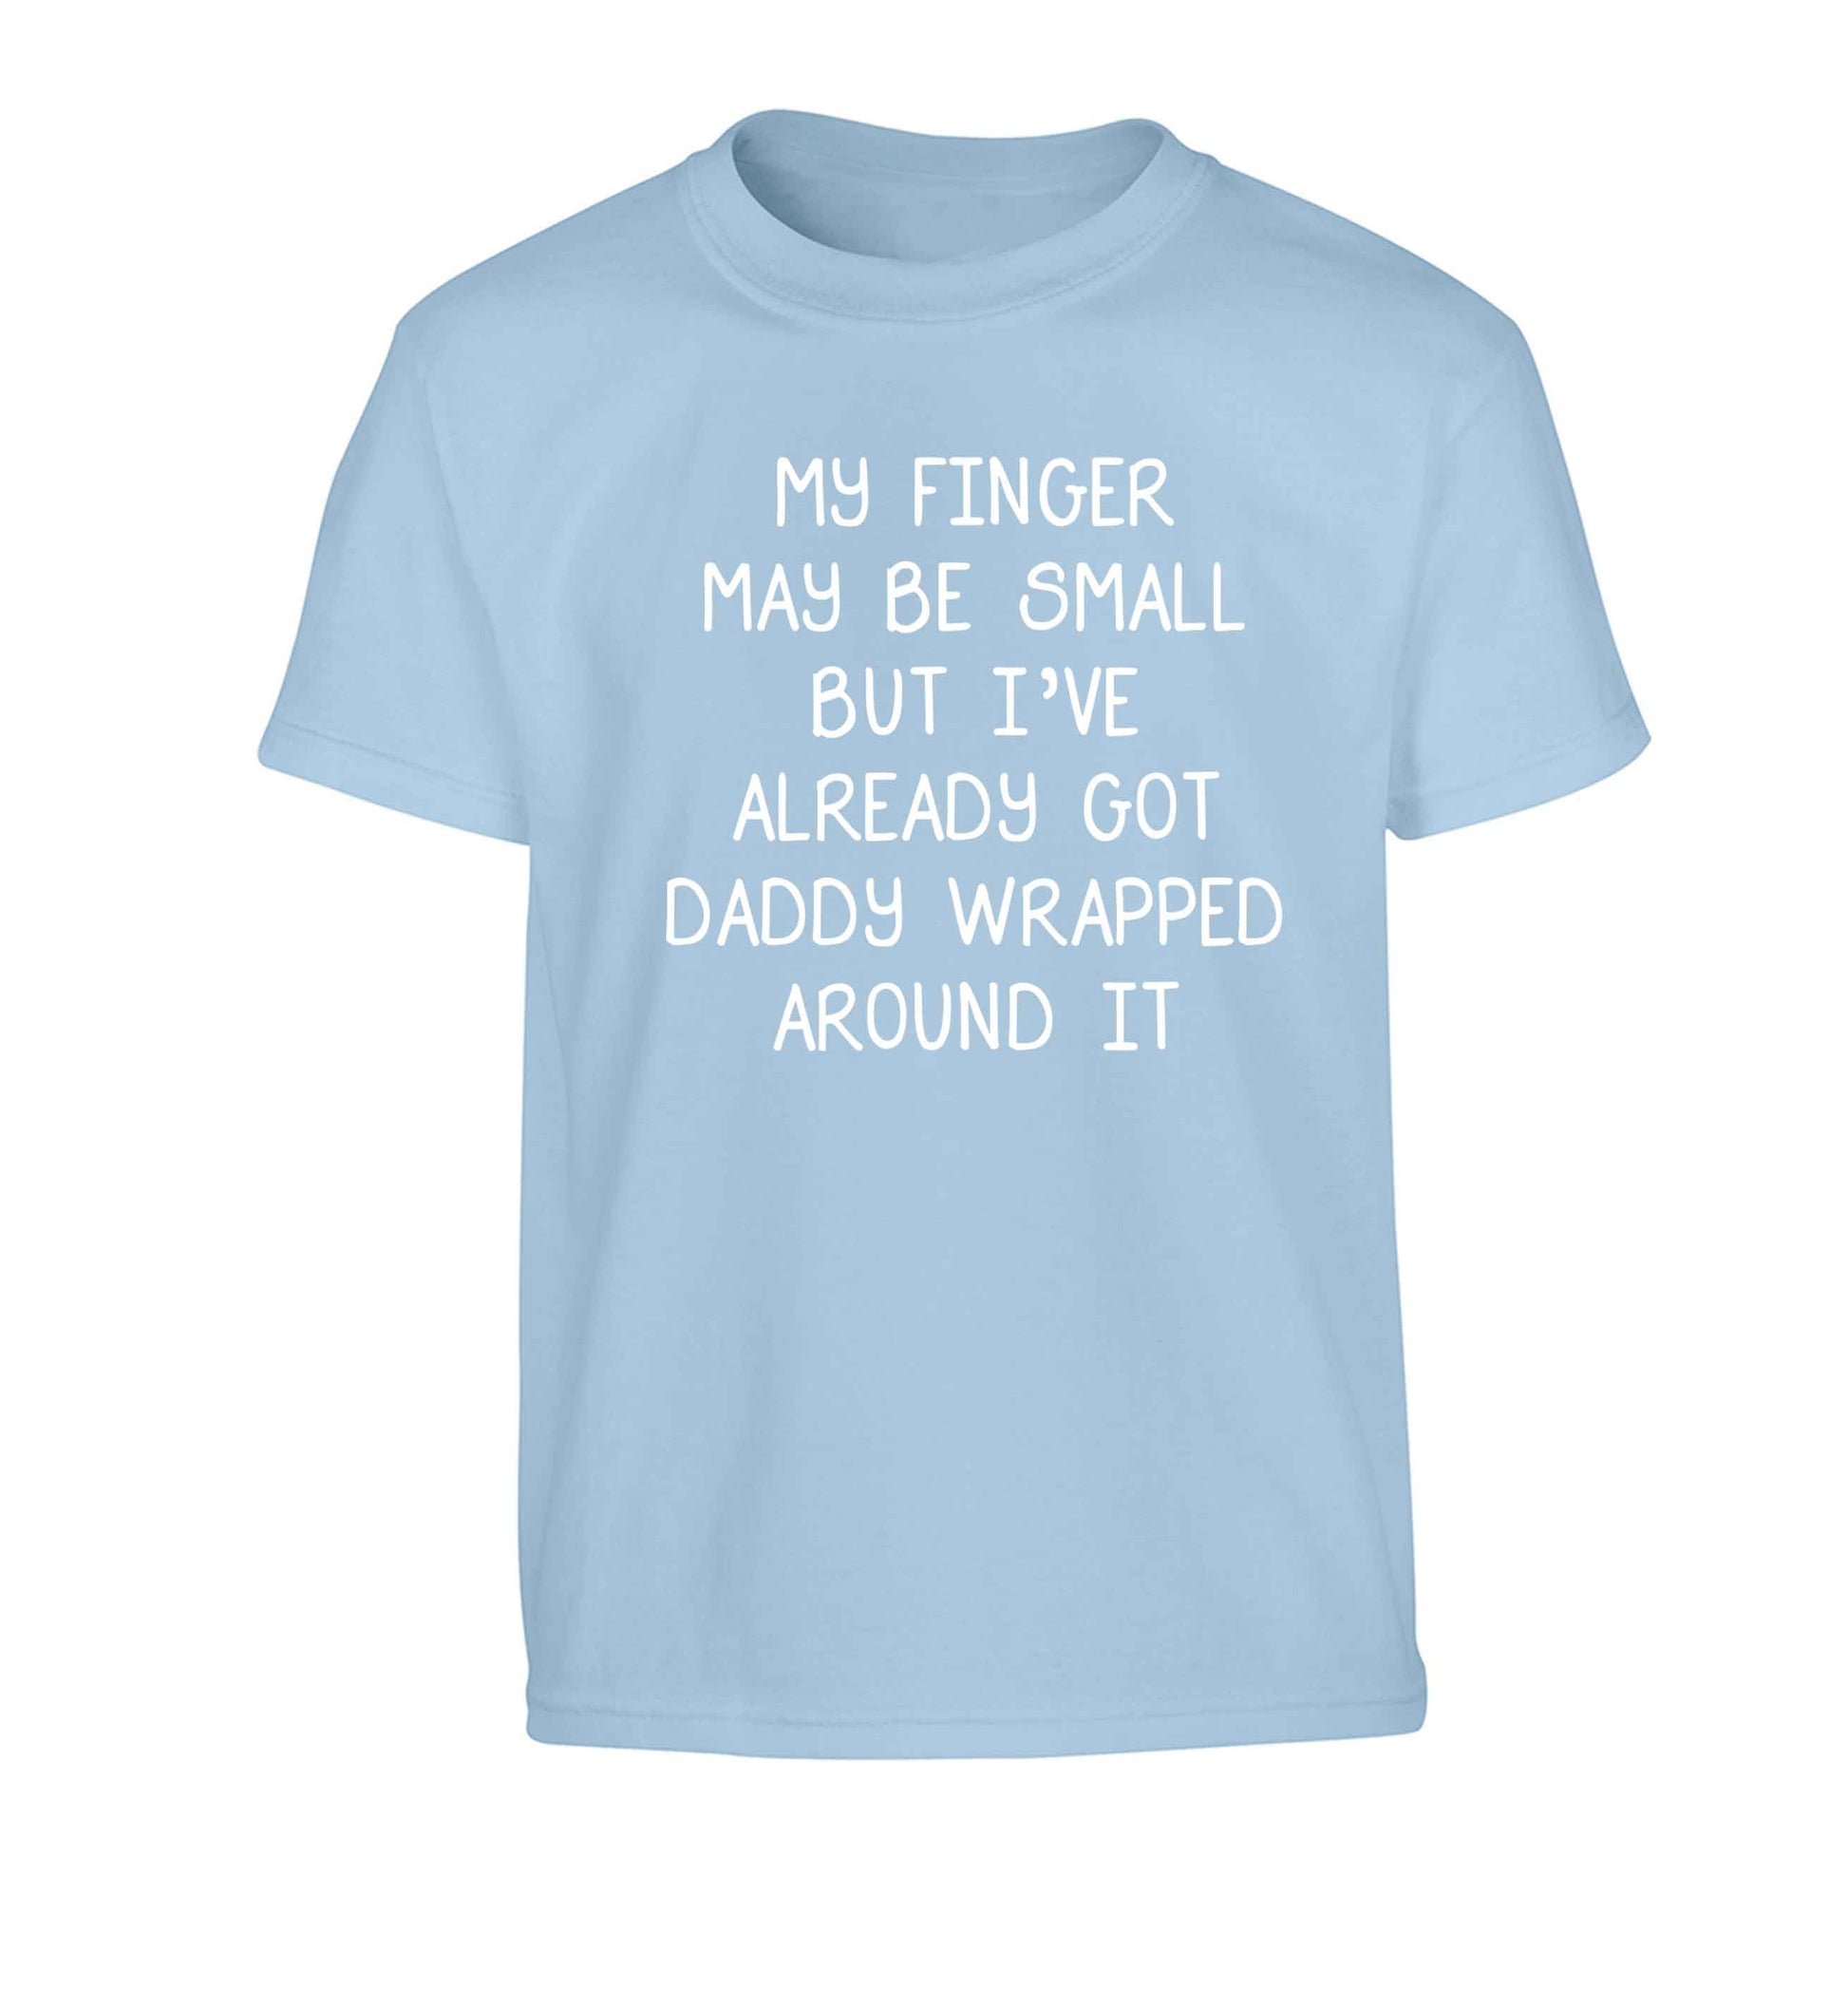 My finger may be small but I've already got daddy wrapped around it Children's light blue Tshirt 12-13 Years